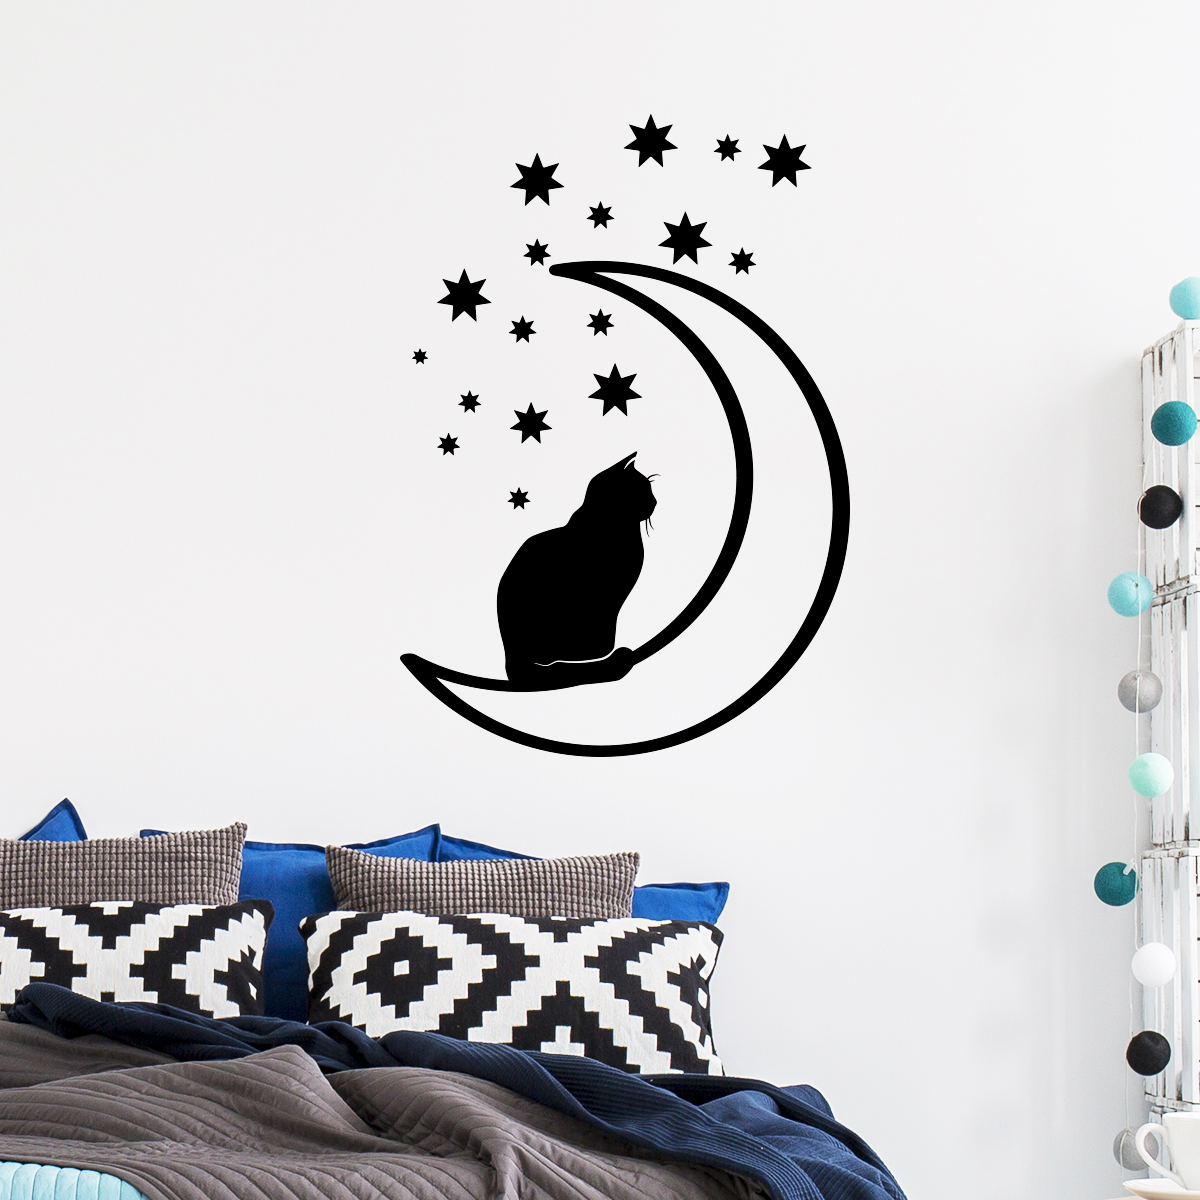 Wall decal cat and stars